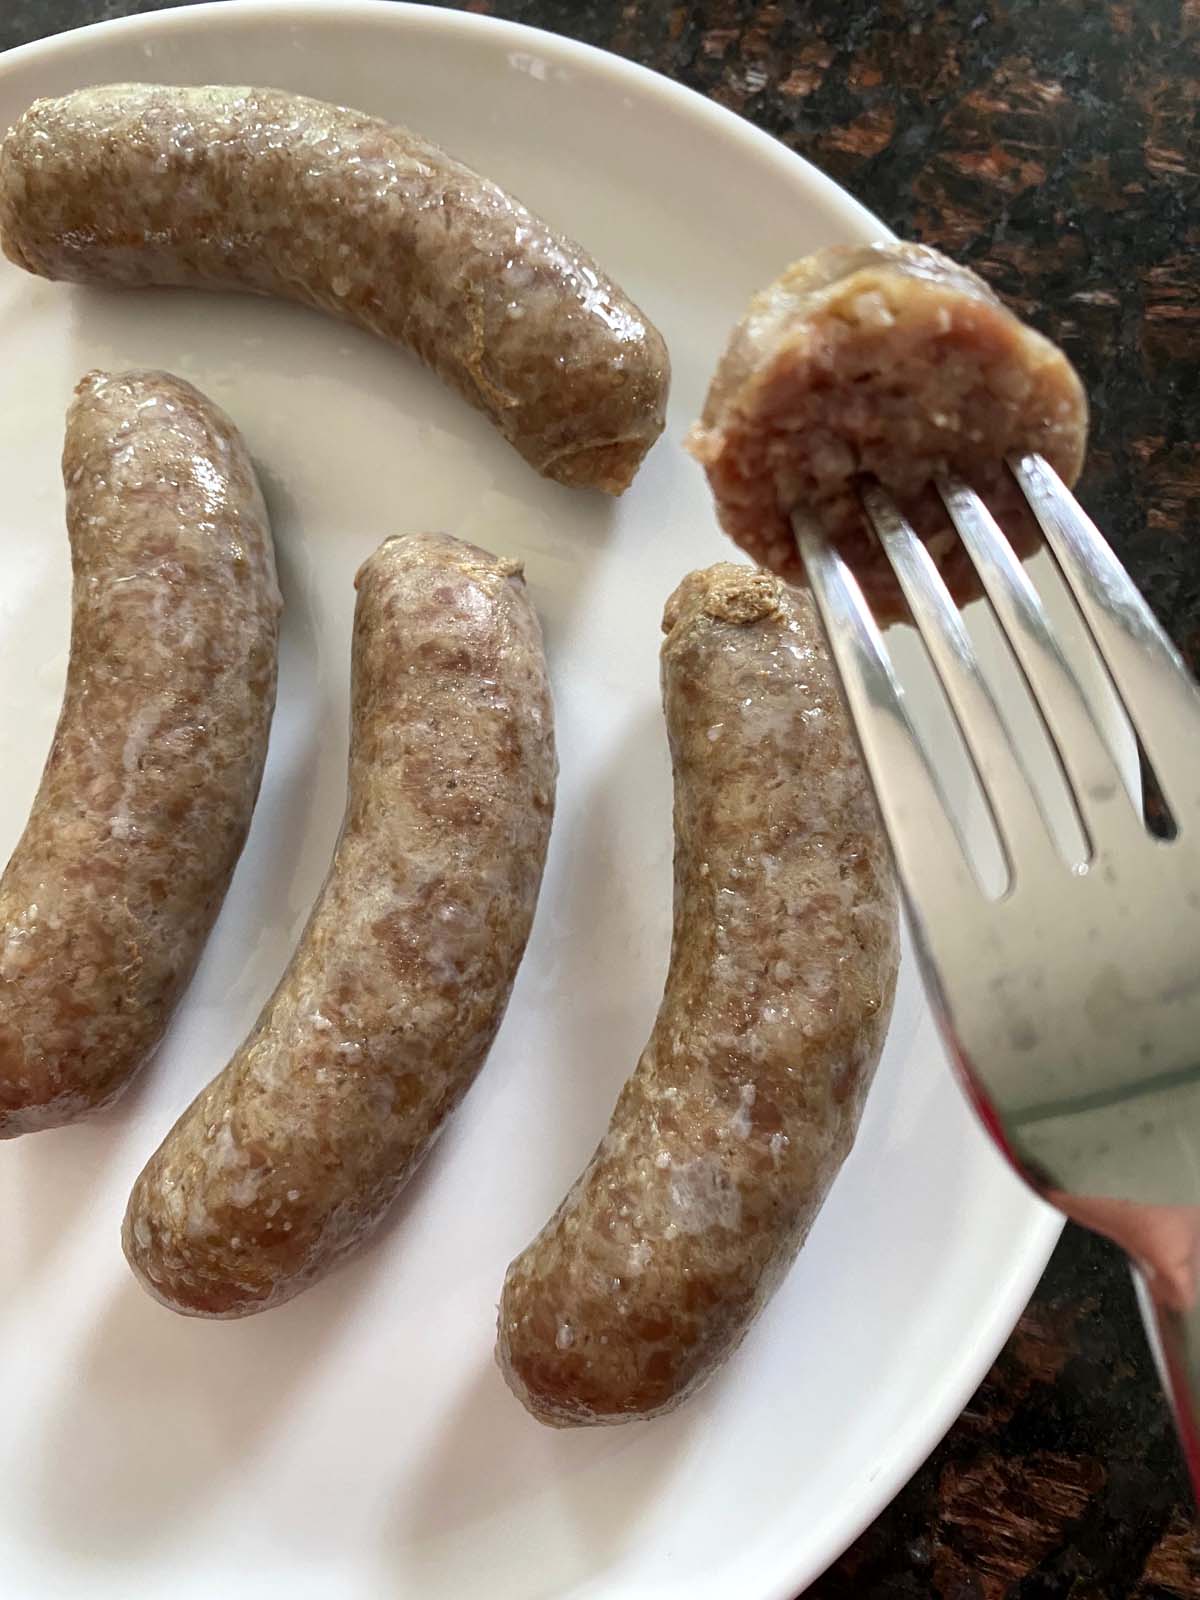 Plate of sausages after cooking with a piece on a fork.